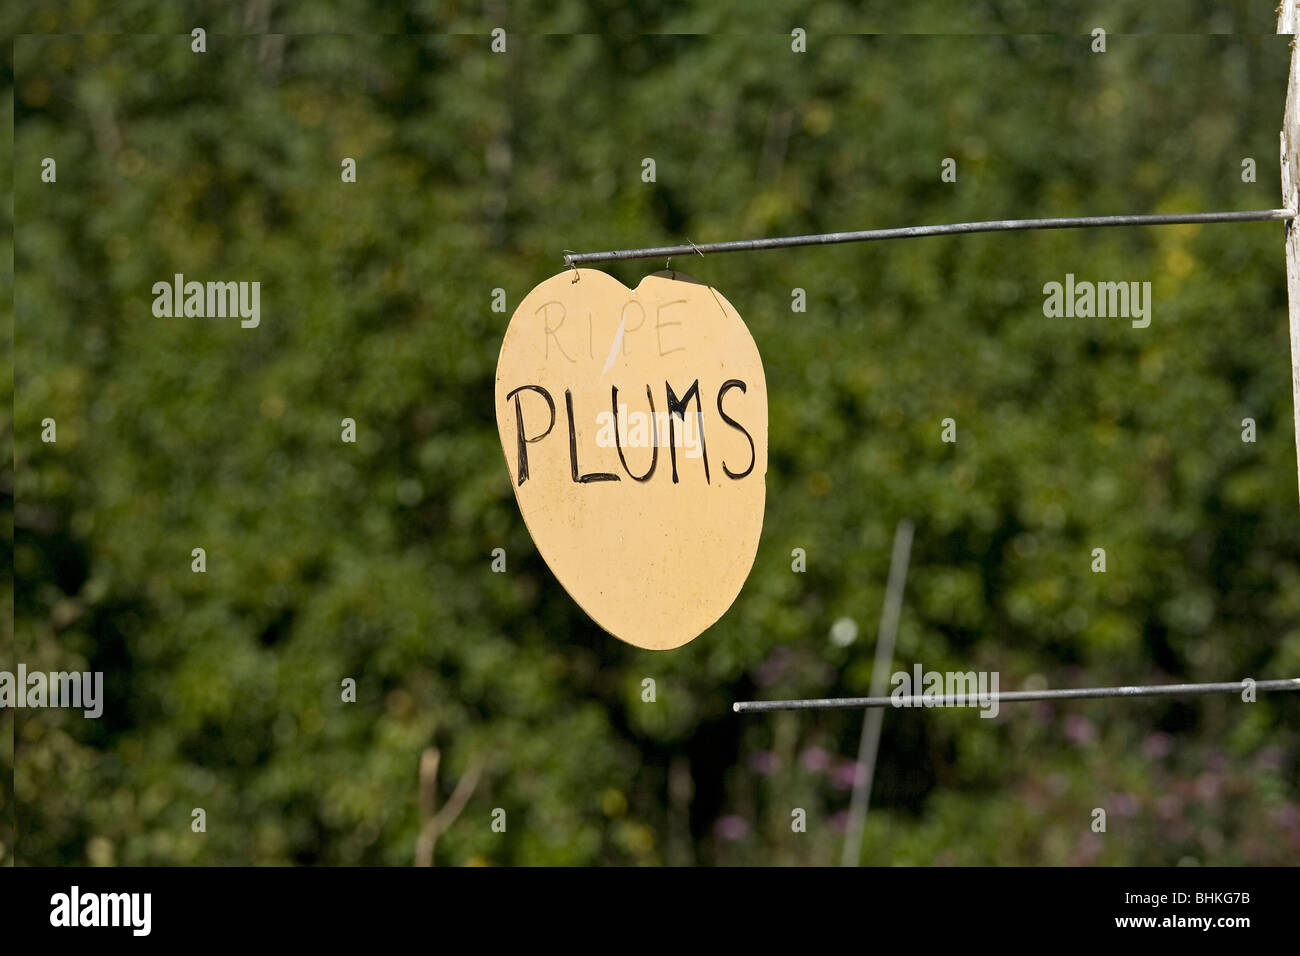 Plums for sale sign, Berkshire, England. Stock Photo